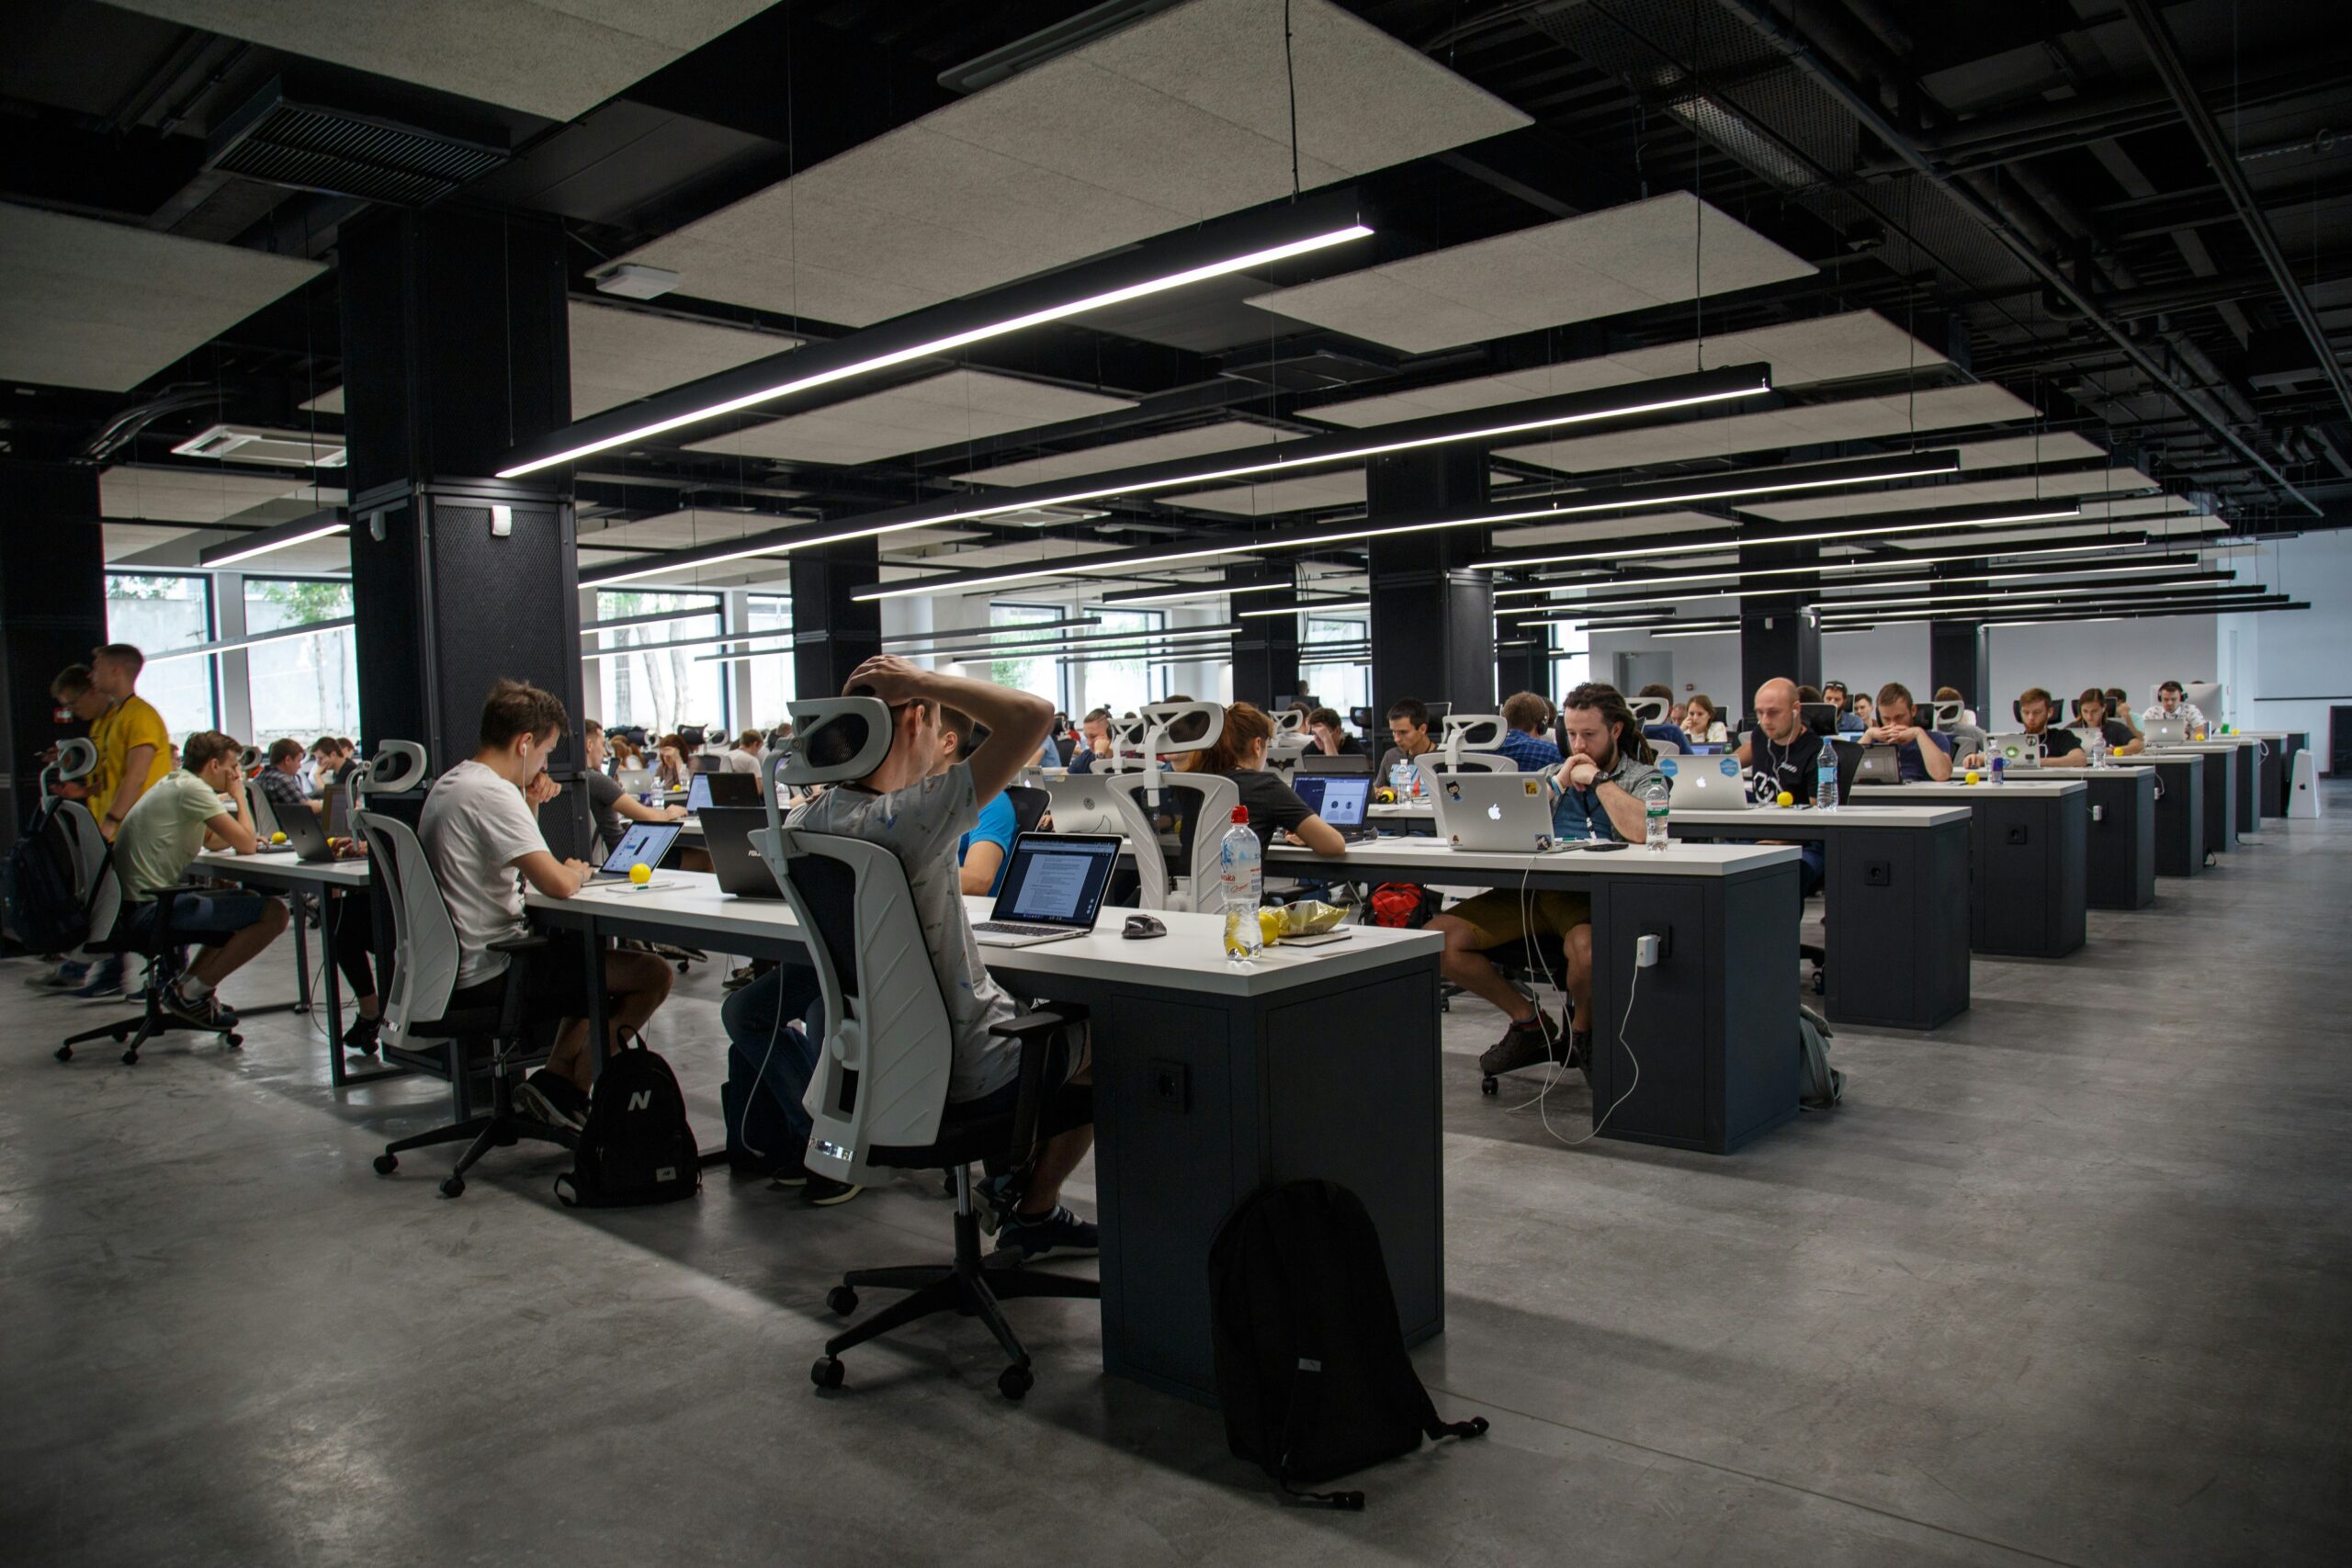 Modern office space filled with IT consultants working at desks with computers, researching what does a IT consultant do.